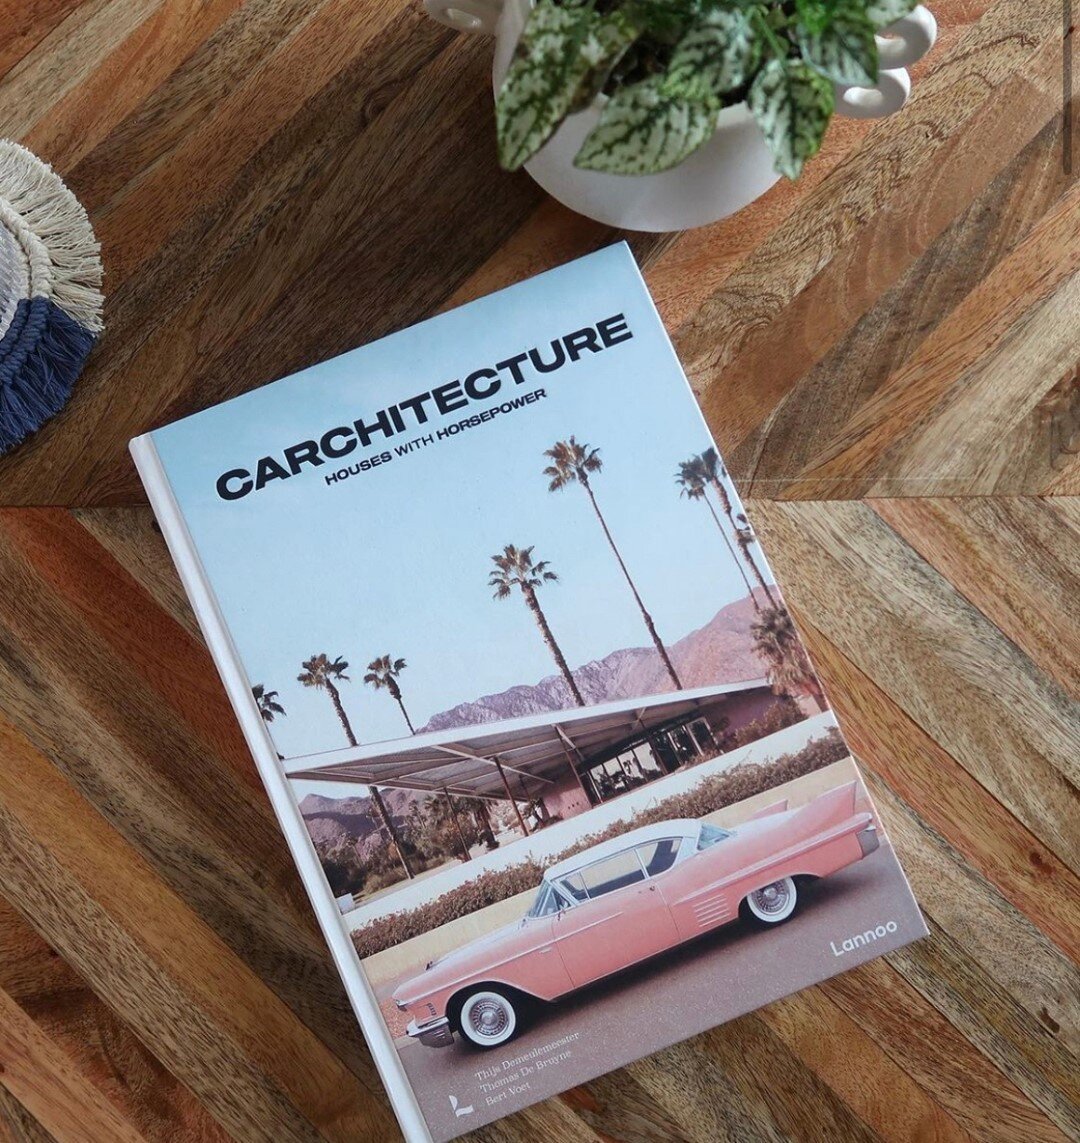 Happiness is a good coffee table book and an afternoon at Burro in Venice 😍⁠ Hint hint to something special coming soon!⁠
⁠
📸: @burrogoods